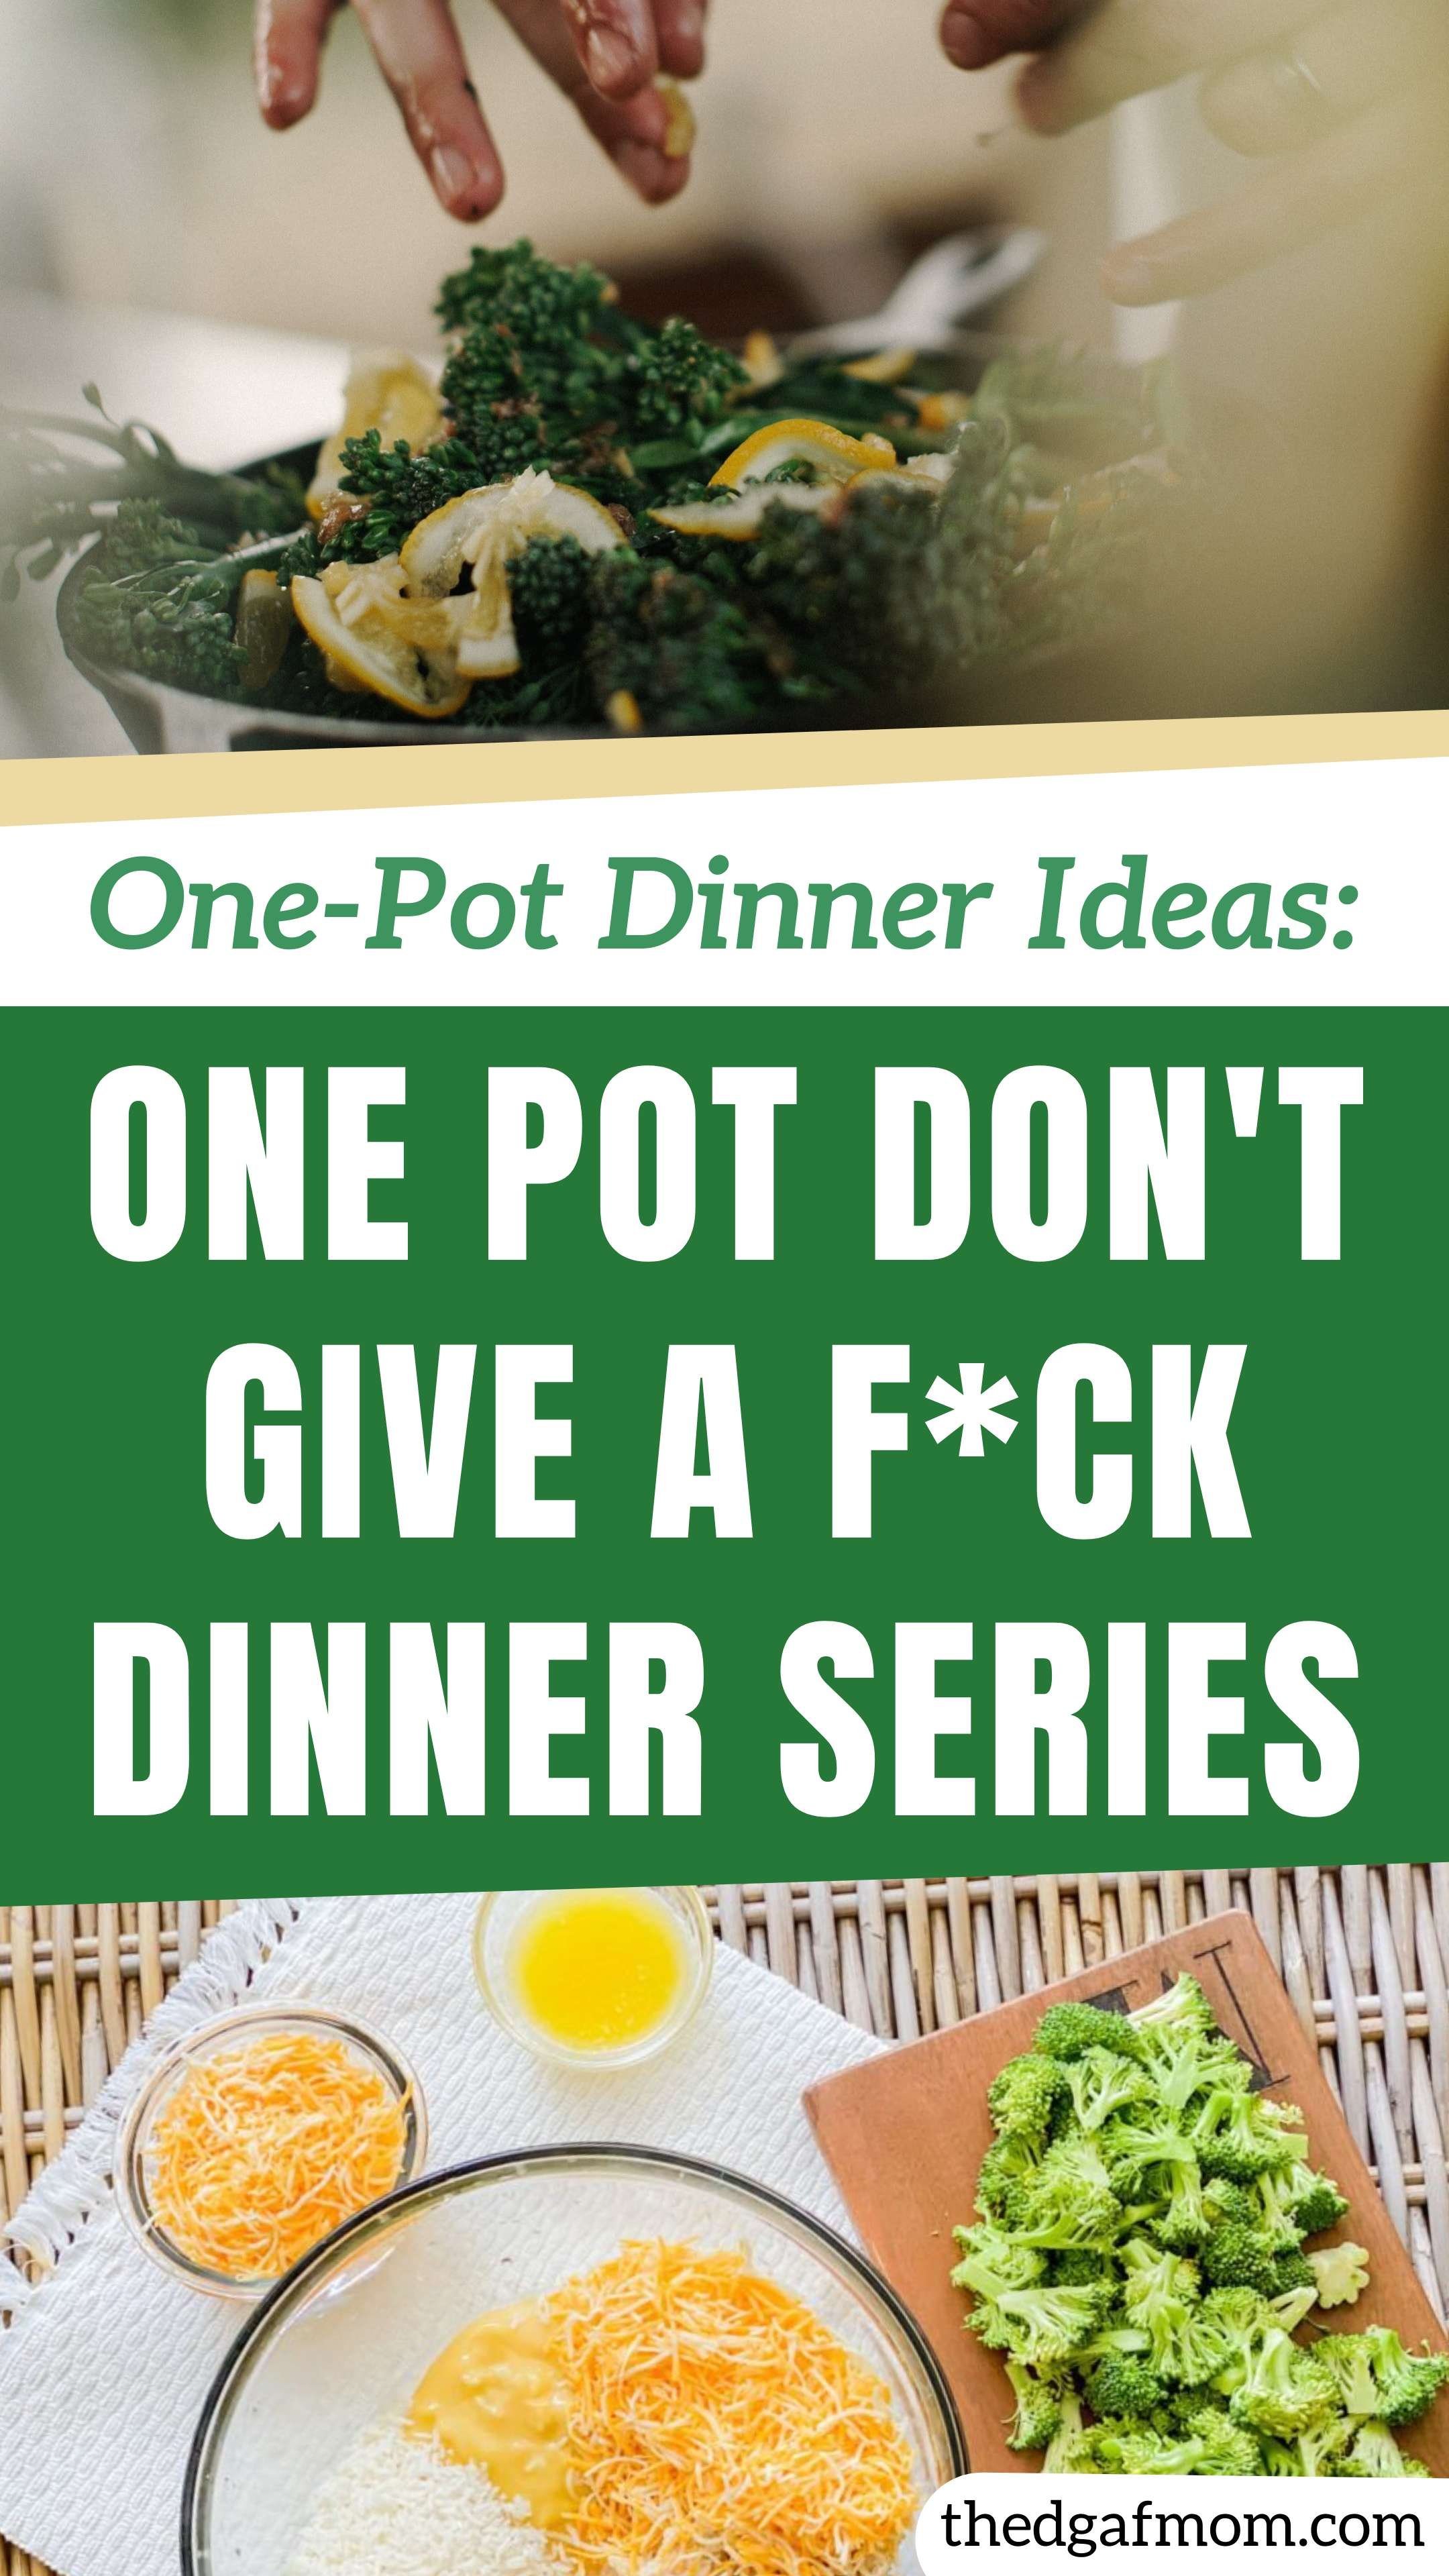 Sick of cooking? These easy one pot dinners will simplify your life and save you time. From chicken dishes to pasta meals, there's something for everyone in this roundup of one pot dinner ideas. Check out these quick-to-prepare recipes that'll make i